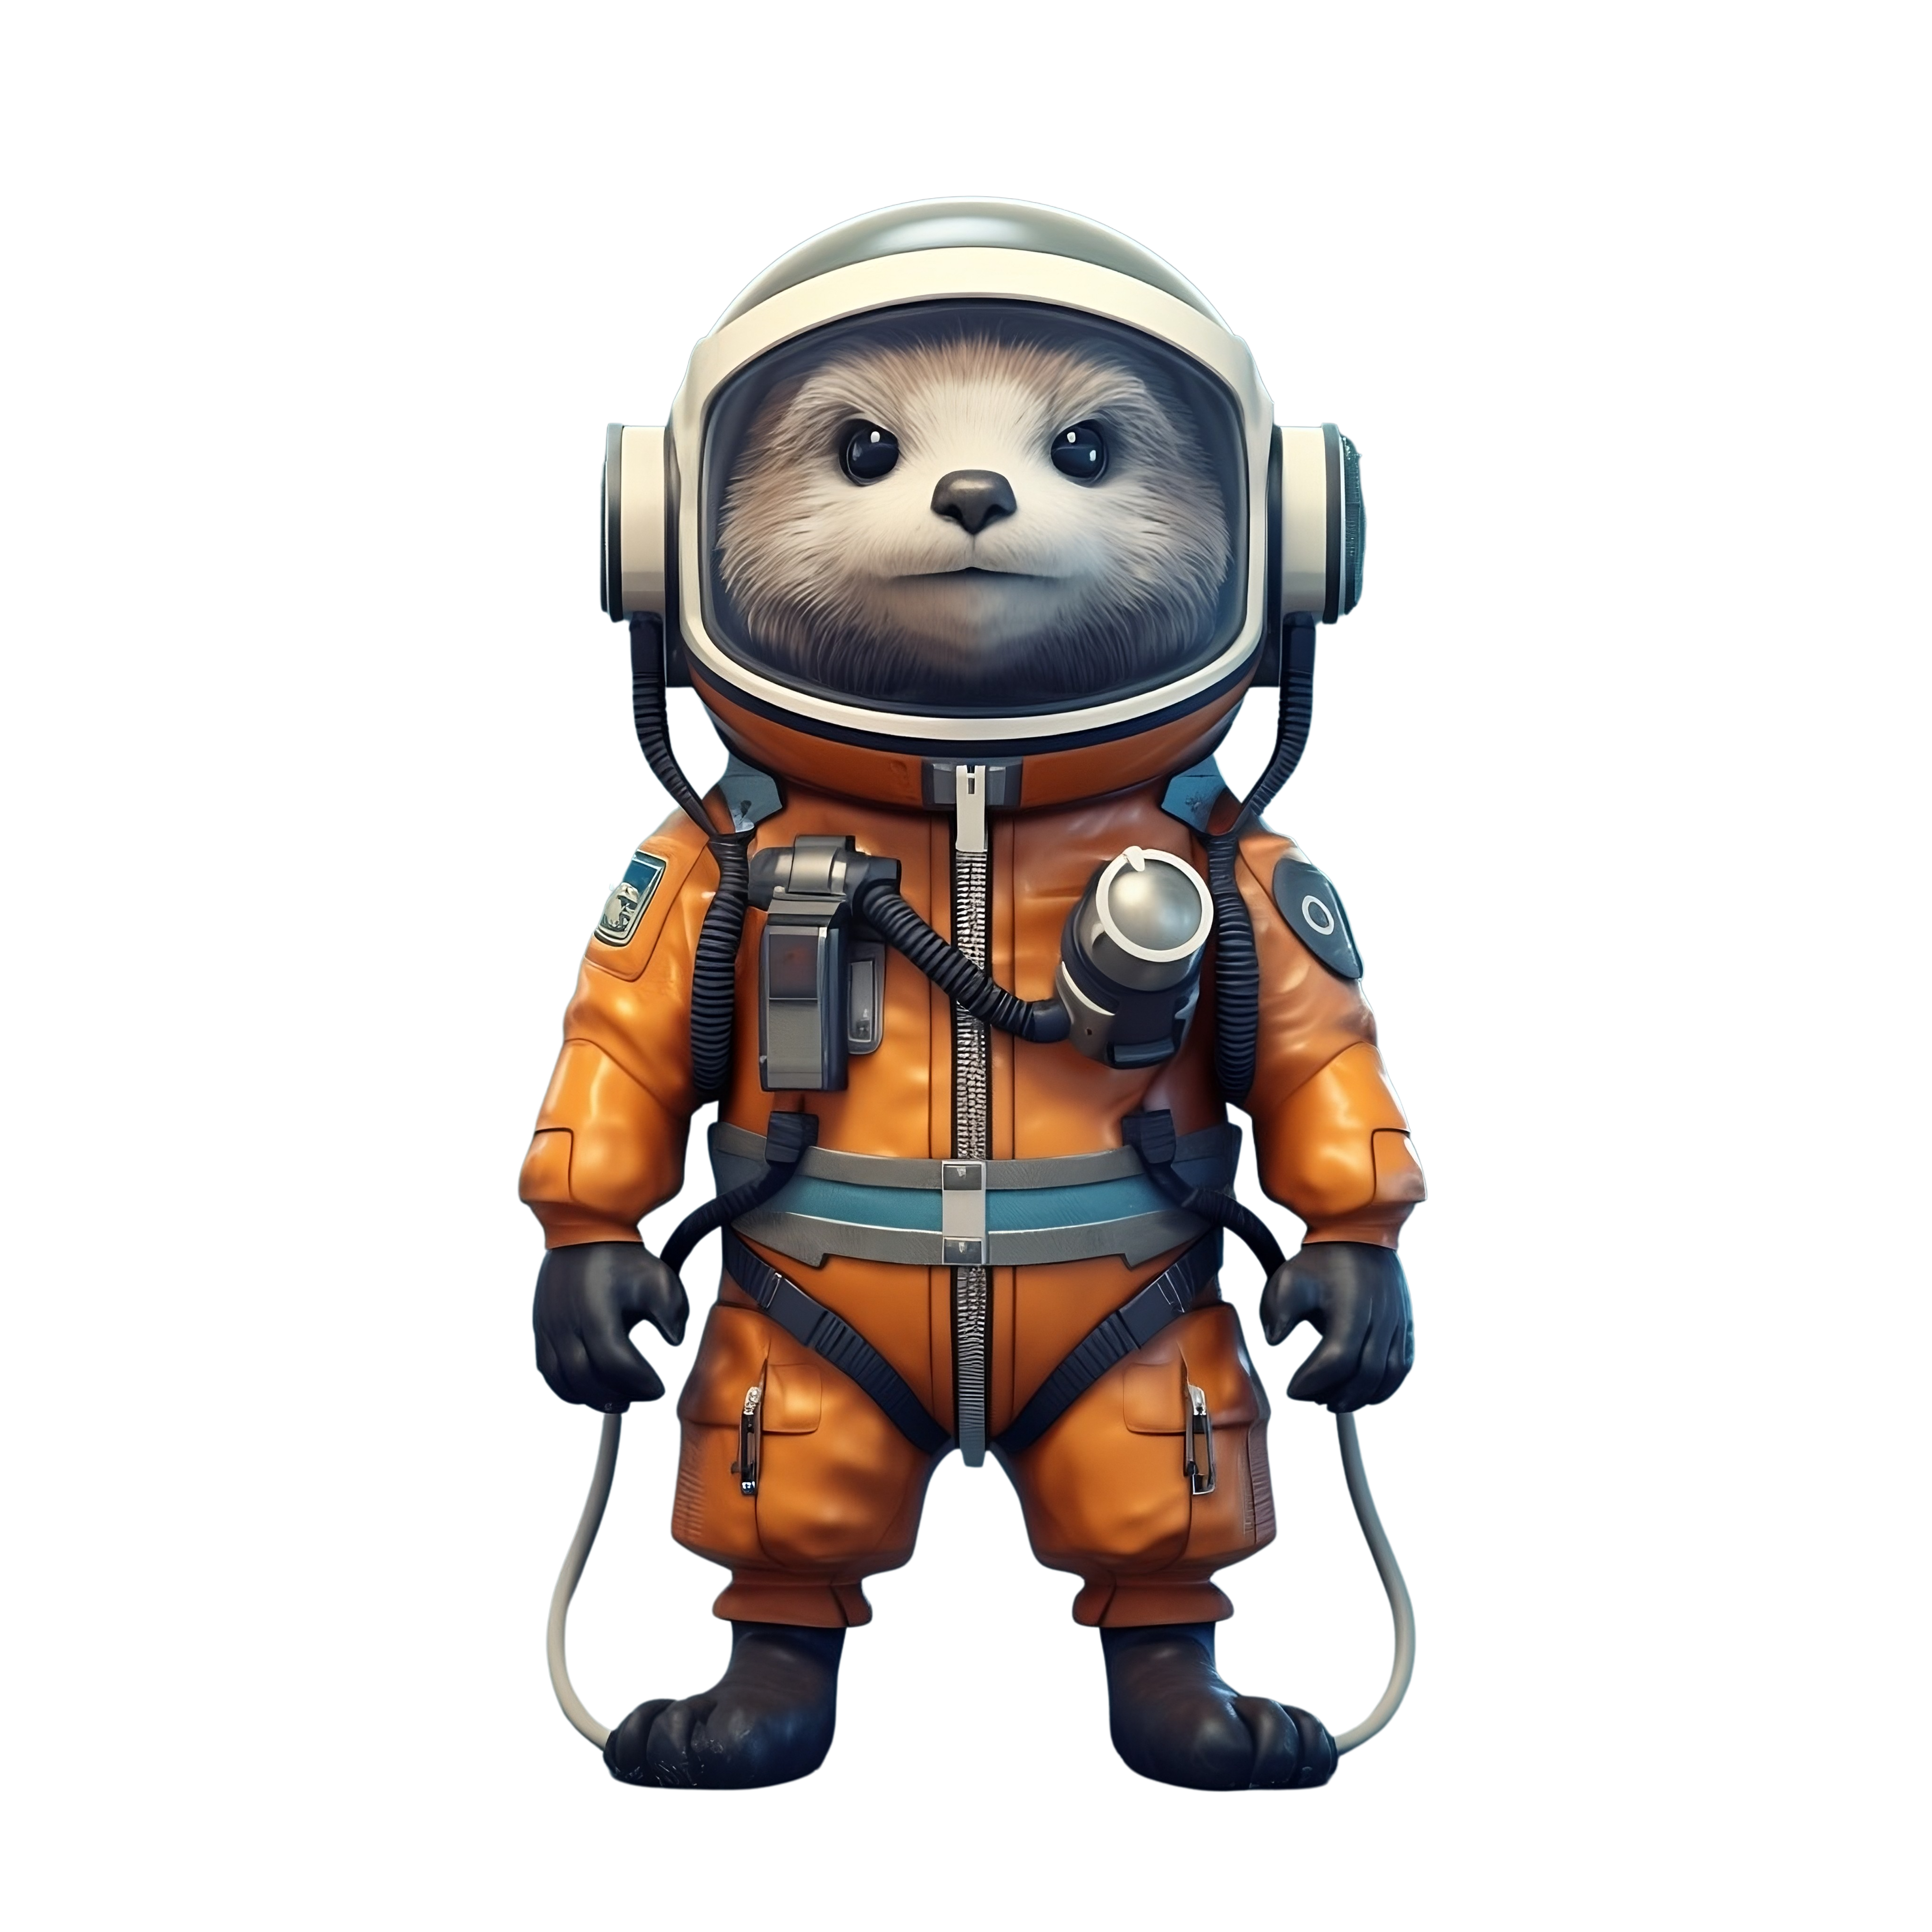 Futuristic otter in a space suit representing advanced AI solutions by Otter Trends.